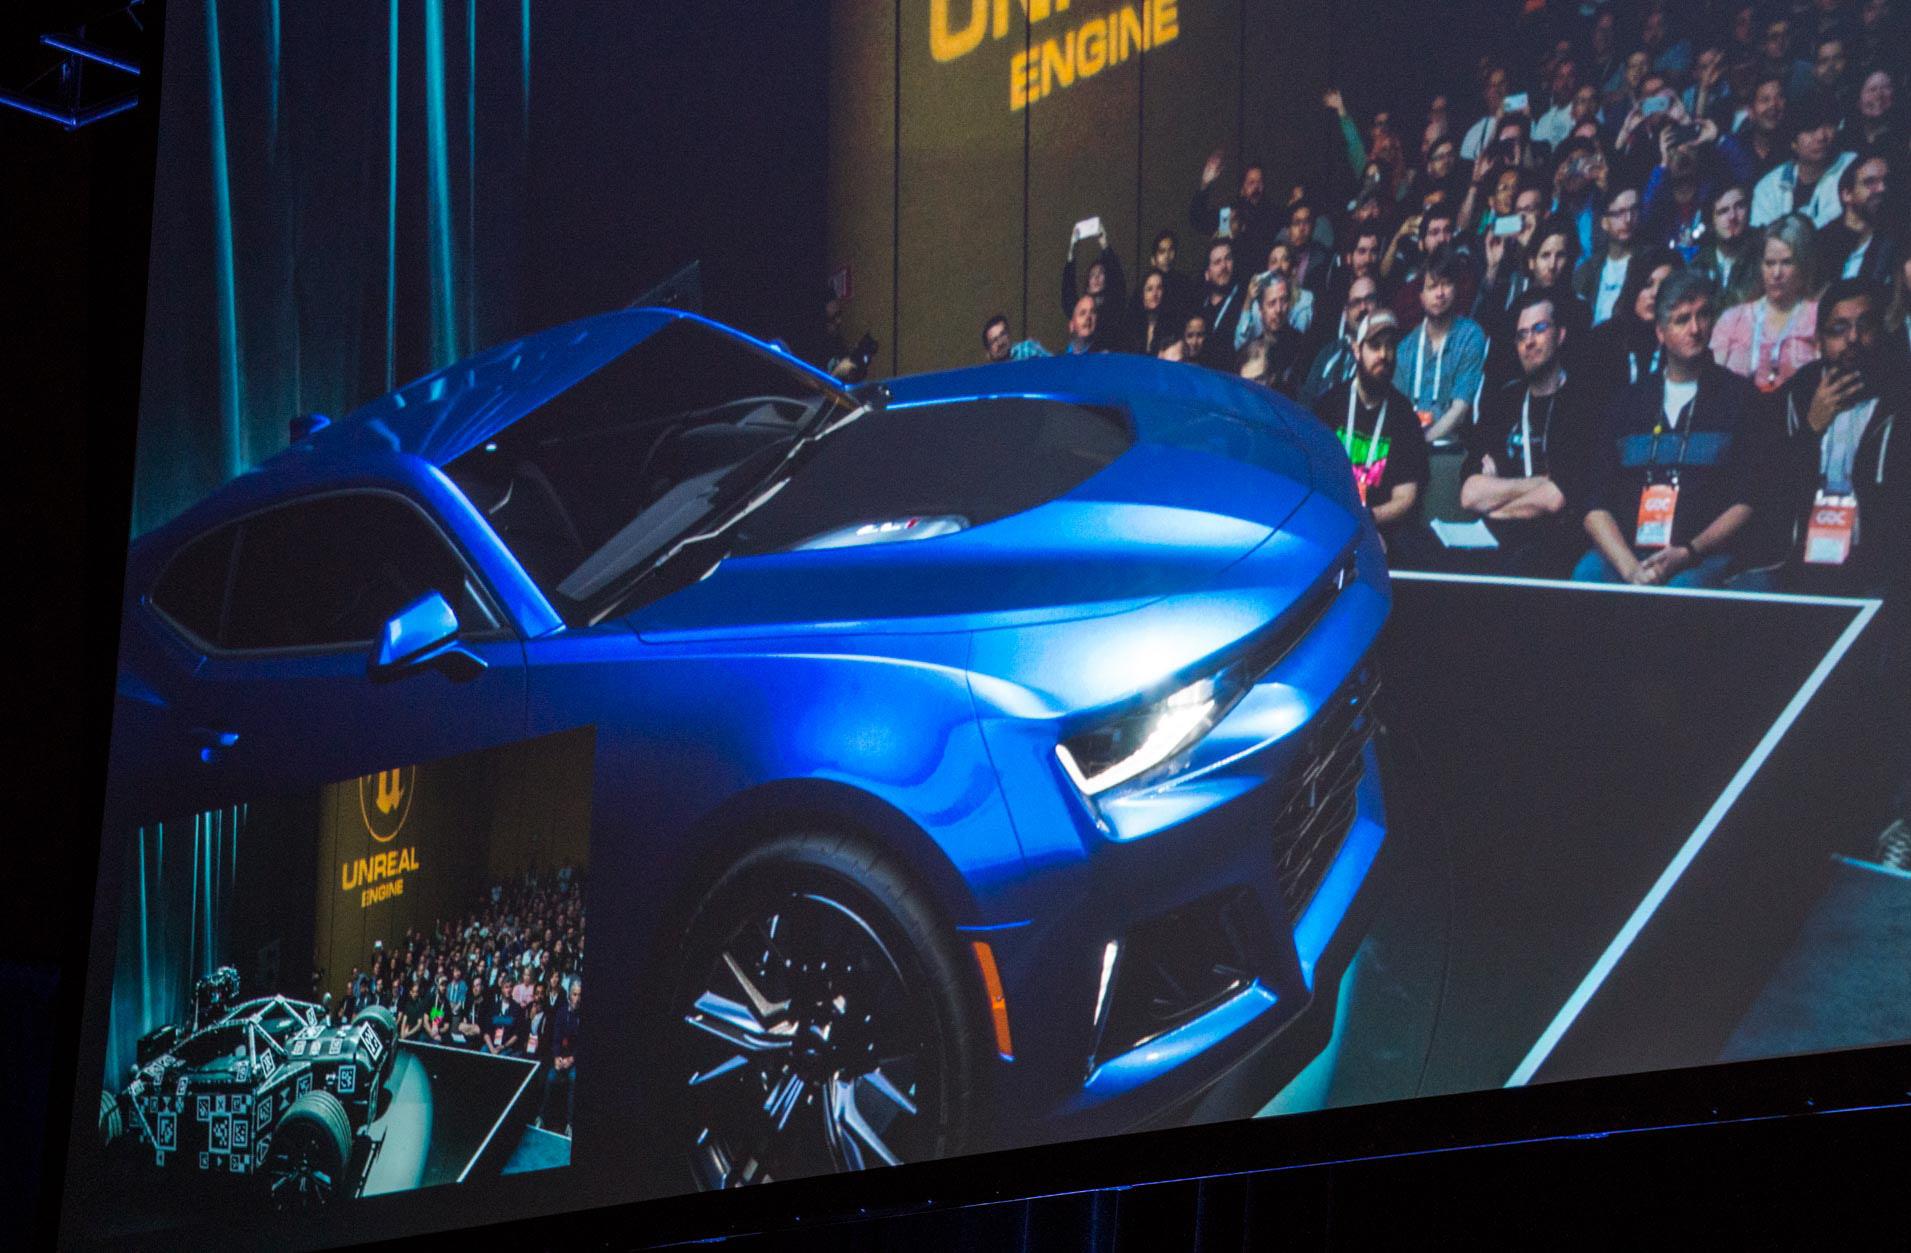 The view from Cyclops: The Mill’s Cyclops camera shows the Blackbird frame (corner window) dressed in a lovely blue Camaro with reflections from audience and stage cast on the car’s body. Chevrolet’s Marketing Director Sam Russell said, a car is like a big mirror. (Source: JPR)